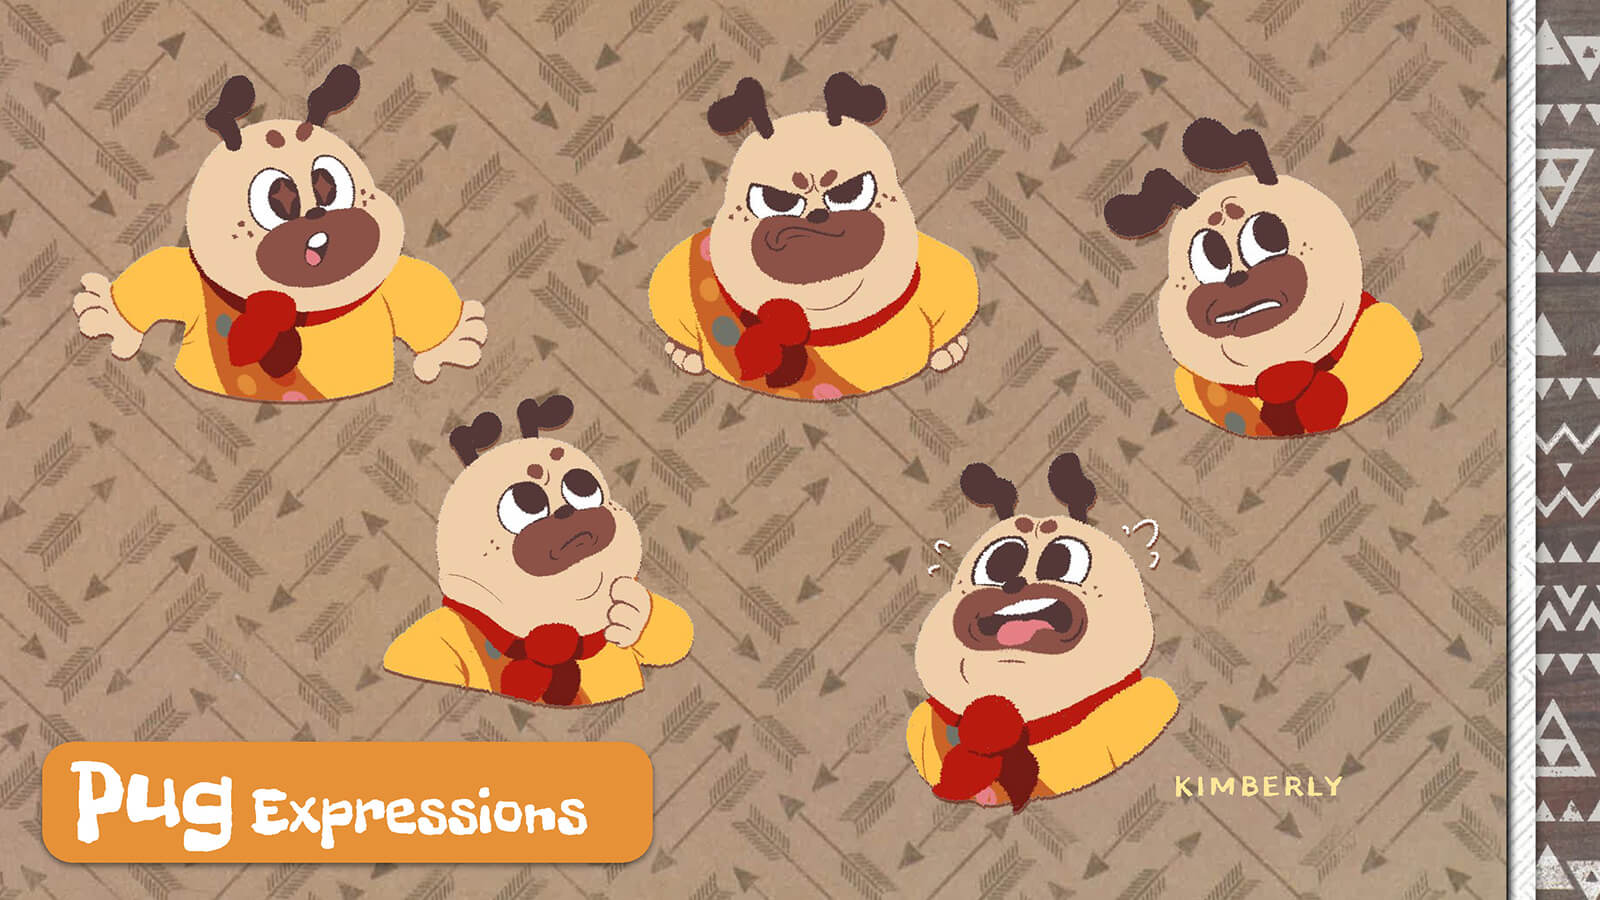 Facial expressions of the character Pug.